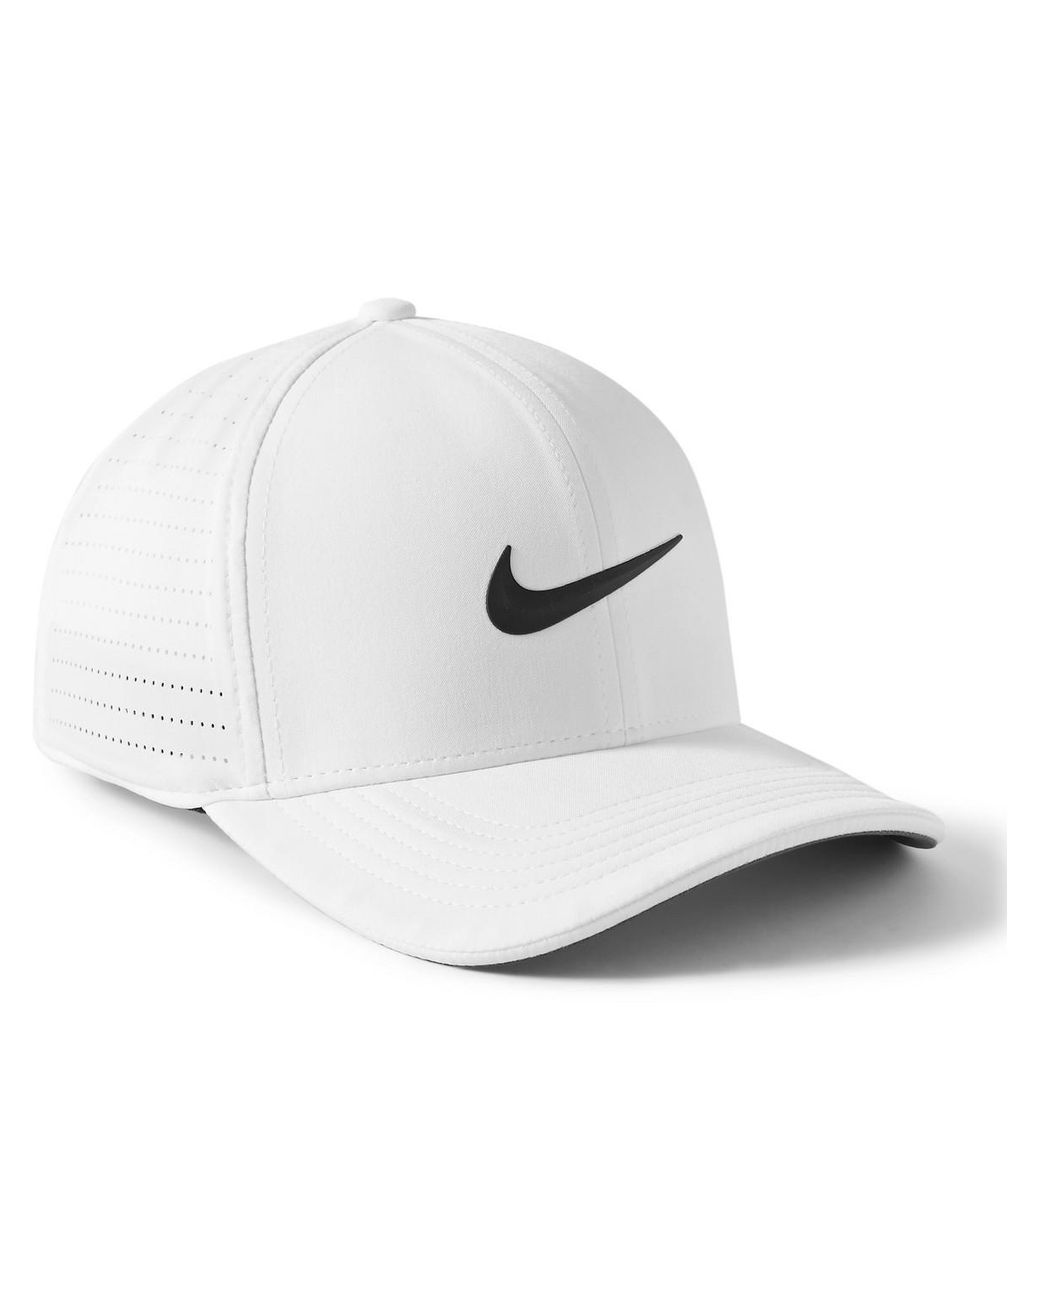 Nike Aerobill Classic99 Perforated Dri-fit Adv Golf Cap in White for ...